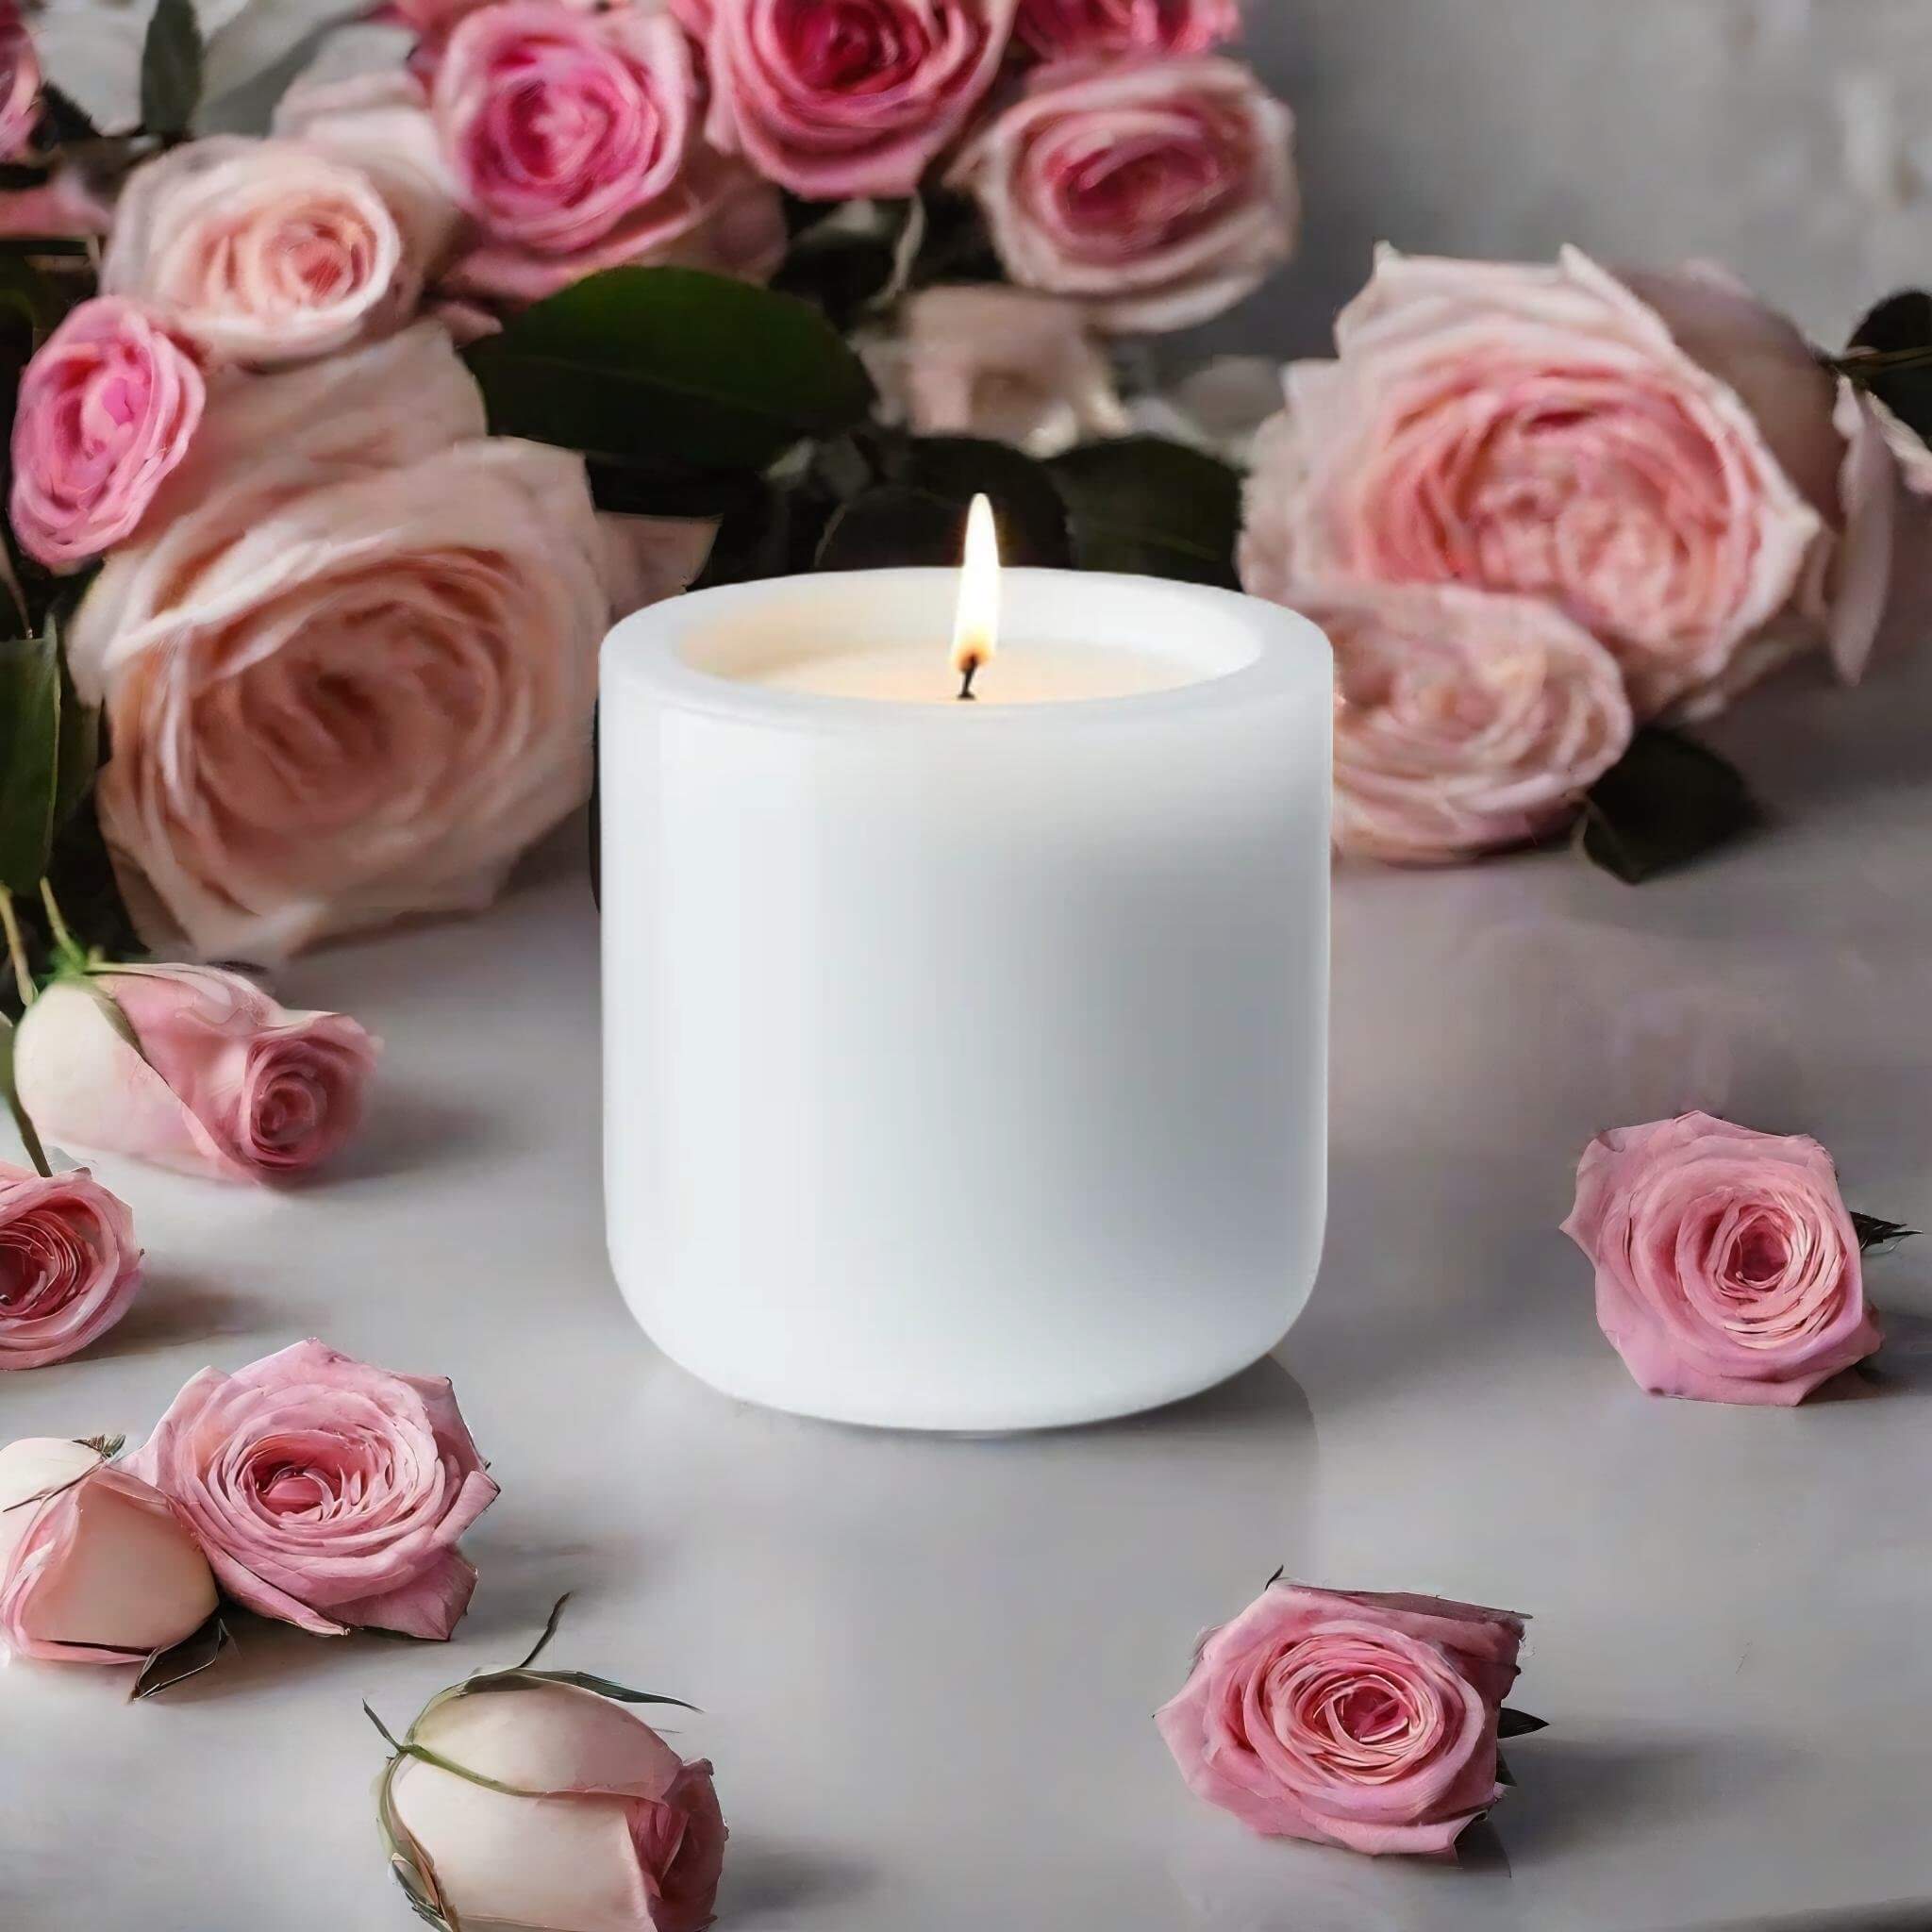 A product standing on a white table, surrounded by roses, product photography